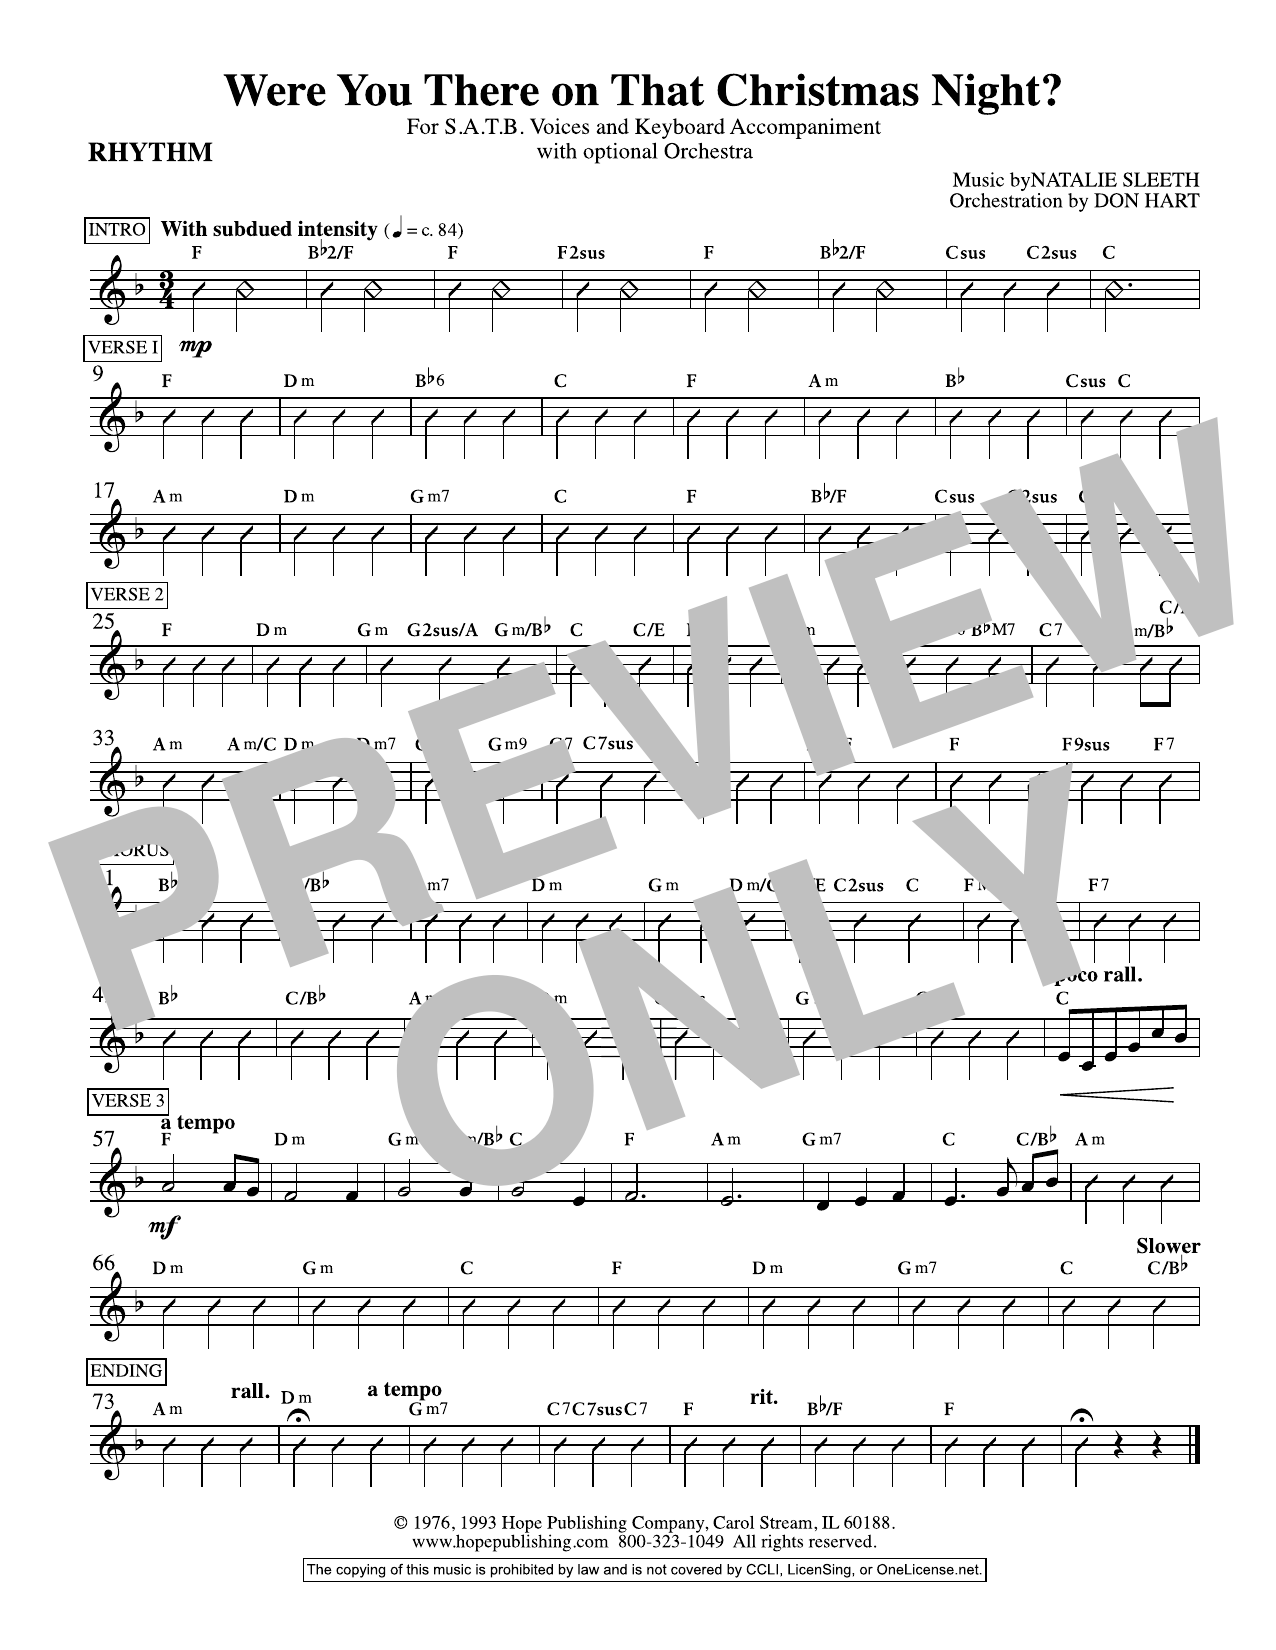 Download NATALIE SLEETH Were You There On That Christmas Night? Sheet Music